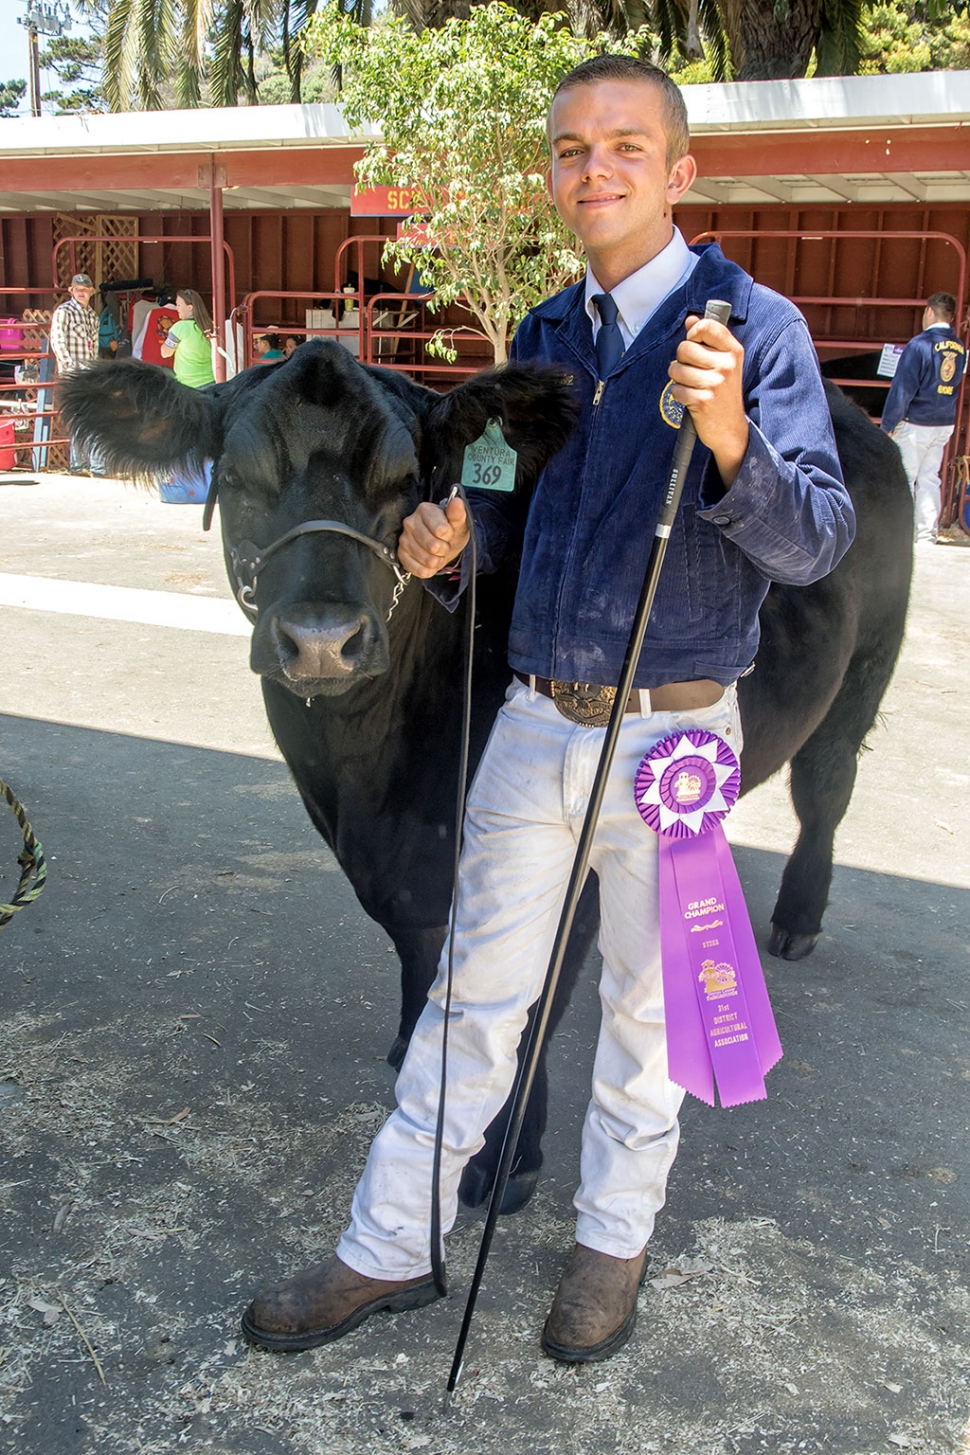 Jeffrey McGuire’s steer top bid was an auction record: $40 per pound. Moonshie should be proud. Jeffrey’s 1,398 pound steer garnered $55,920! Jeffrey, 18, is with the Fillmore FFA program. Last year his steer won FFA Reserve Grand Champion.